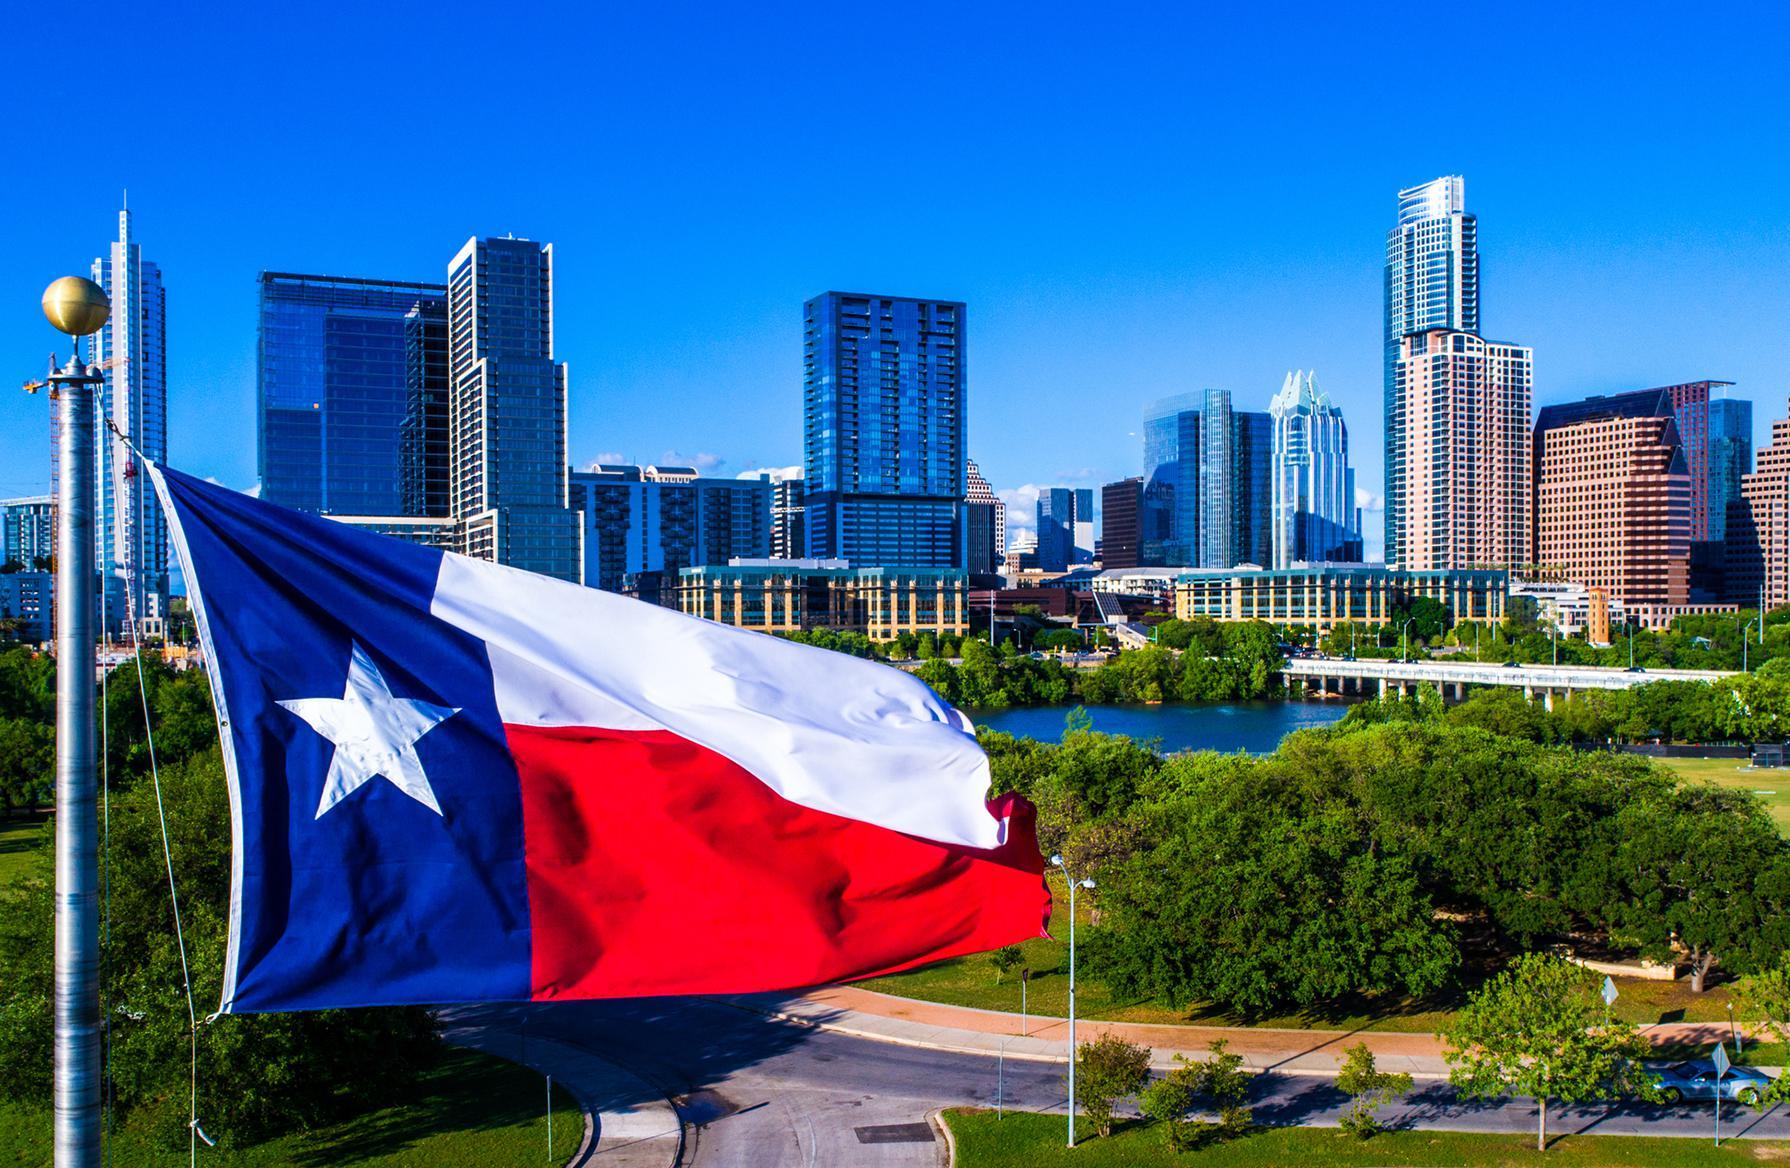 Relocating to Texas? Here’s What You Should Know